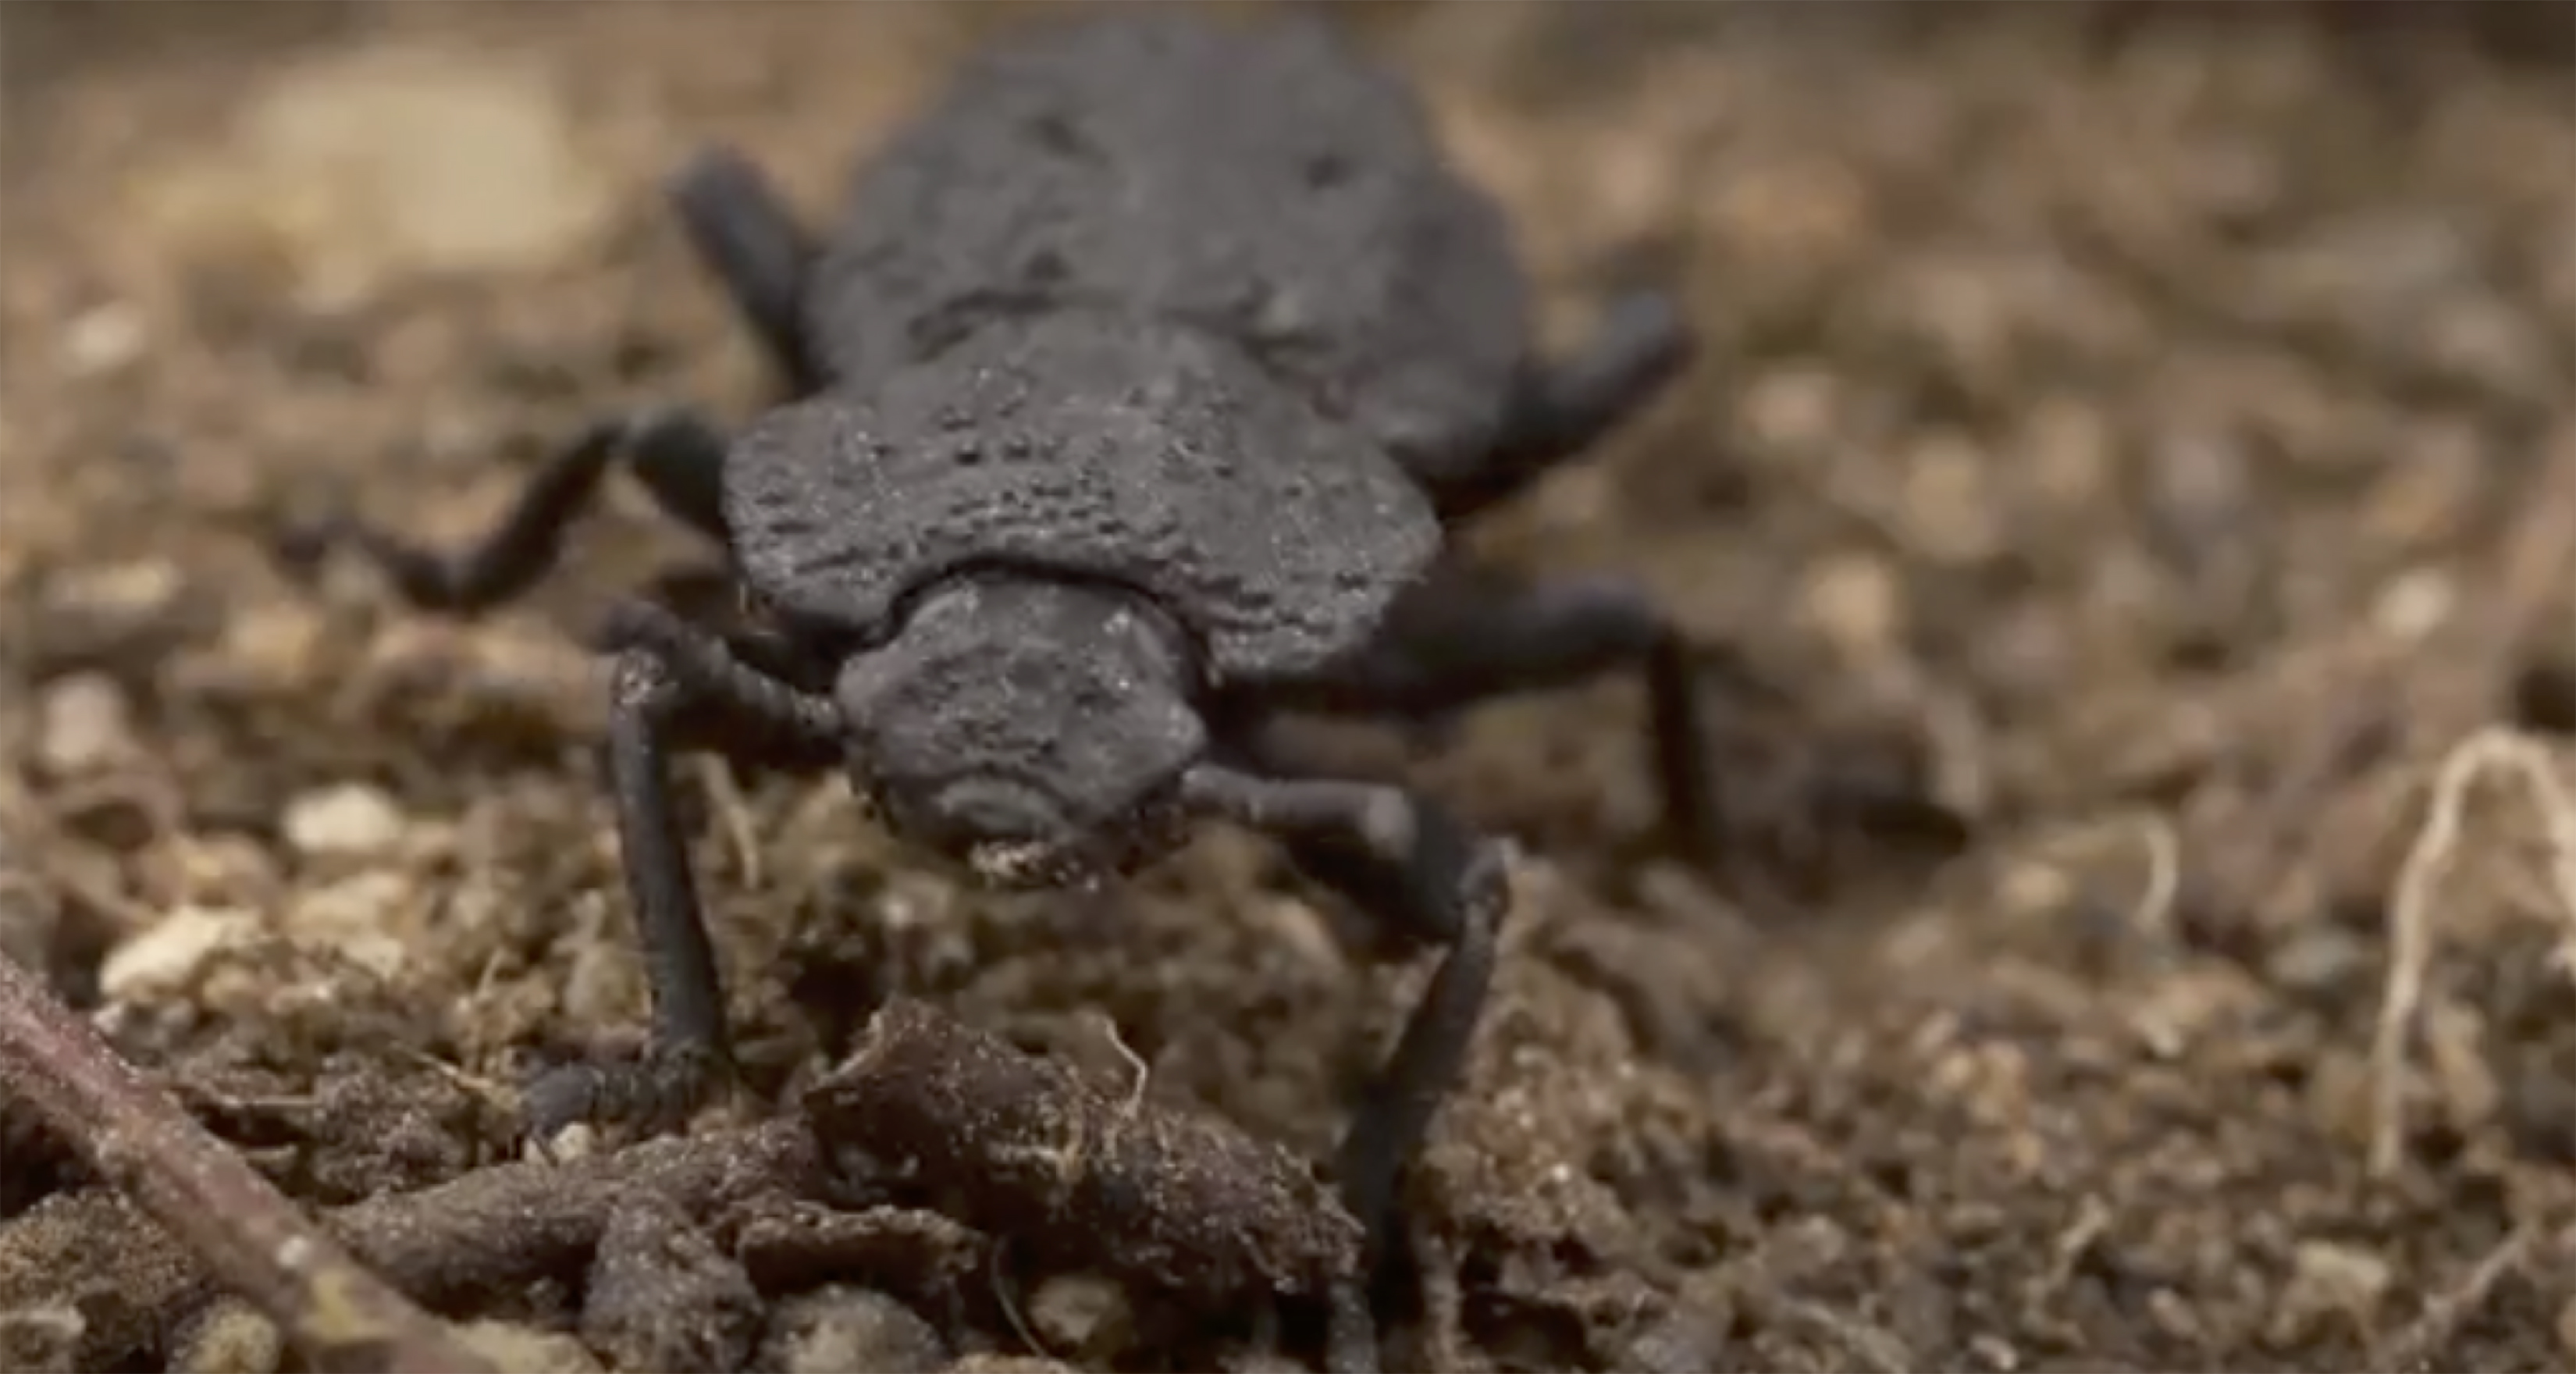 Engineers Study the “Diabolical Ironclad Beetle” for Lessons in Strength